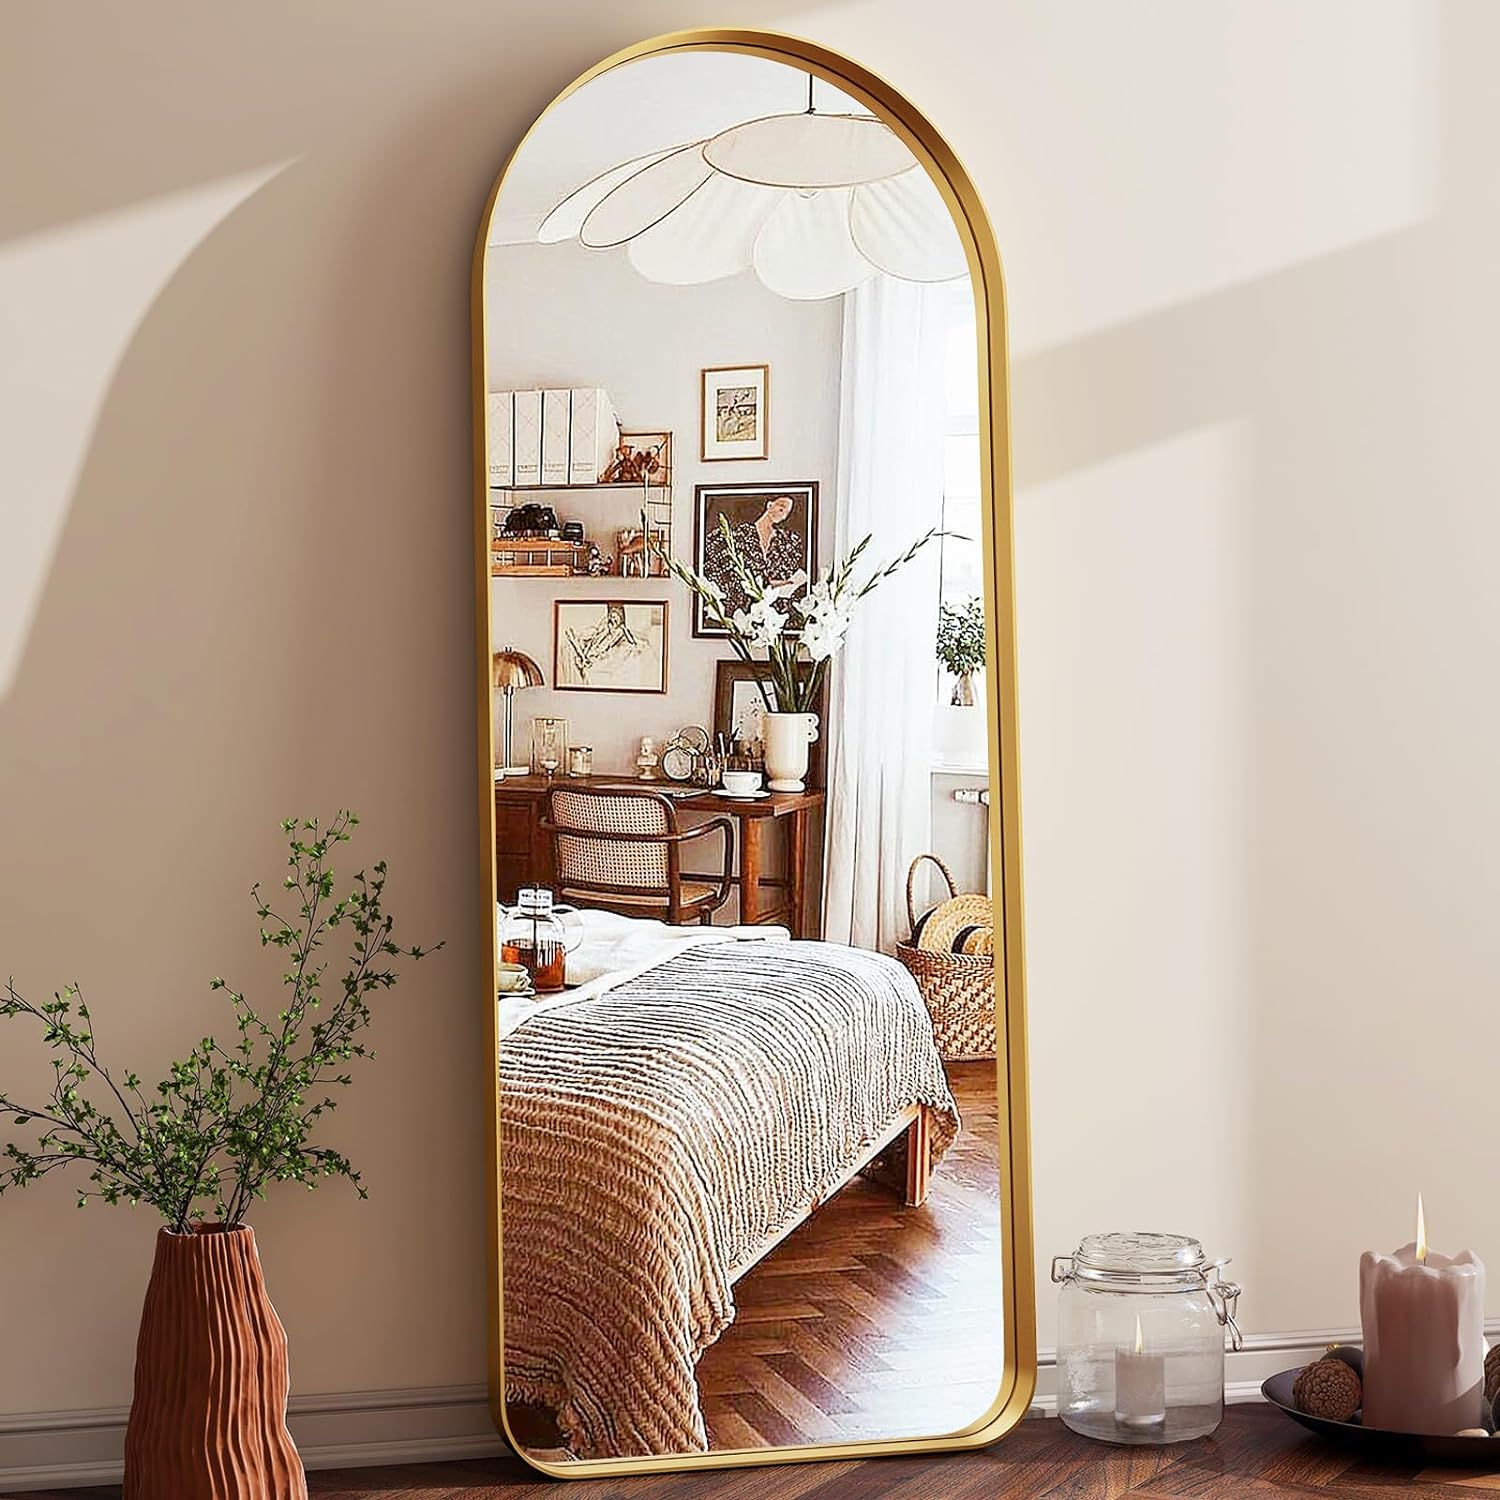 I order from Amazon very often but barely ever leave reviews but this mirror is worth a review not only is it the perfect size for a bigger space, but it is so sleek and beautiful and came in perfect condition. Im not sure why it does not have more than four stars because this is top tier, order this now stop leaving it in your cart and get it. Thank you.